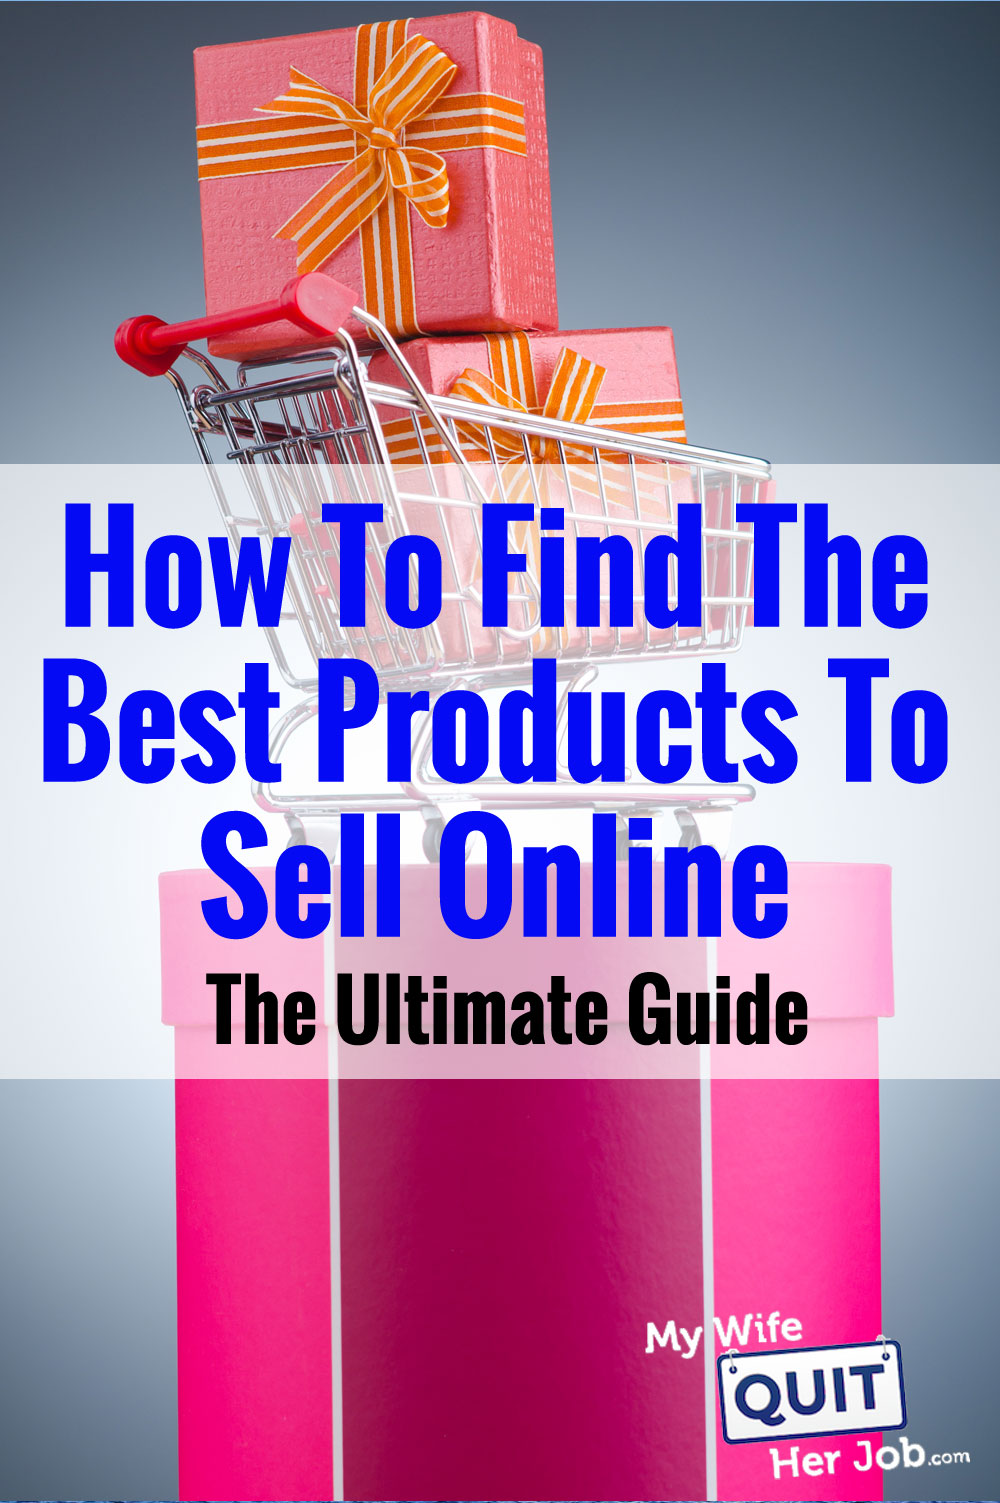 How To Find The Best Products To Sell Online - The Ultimate Step By Step Guide